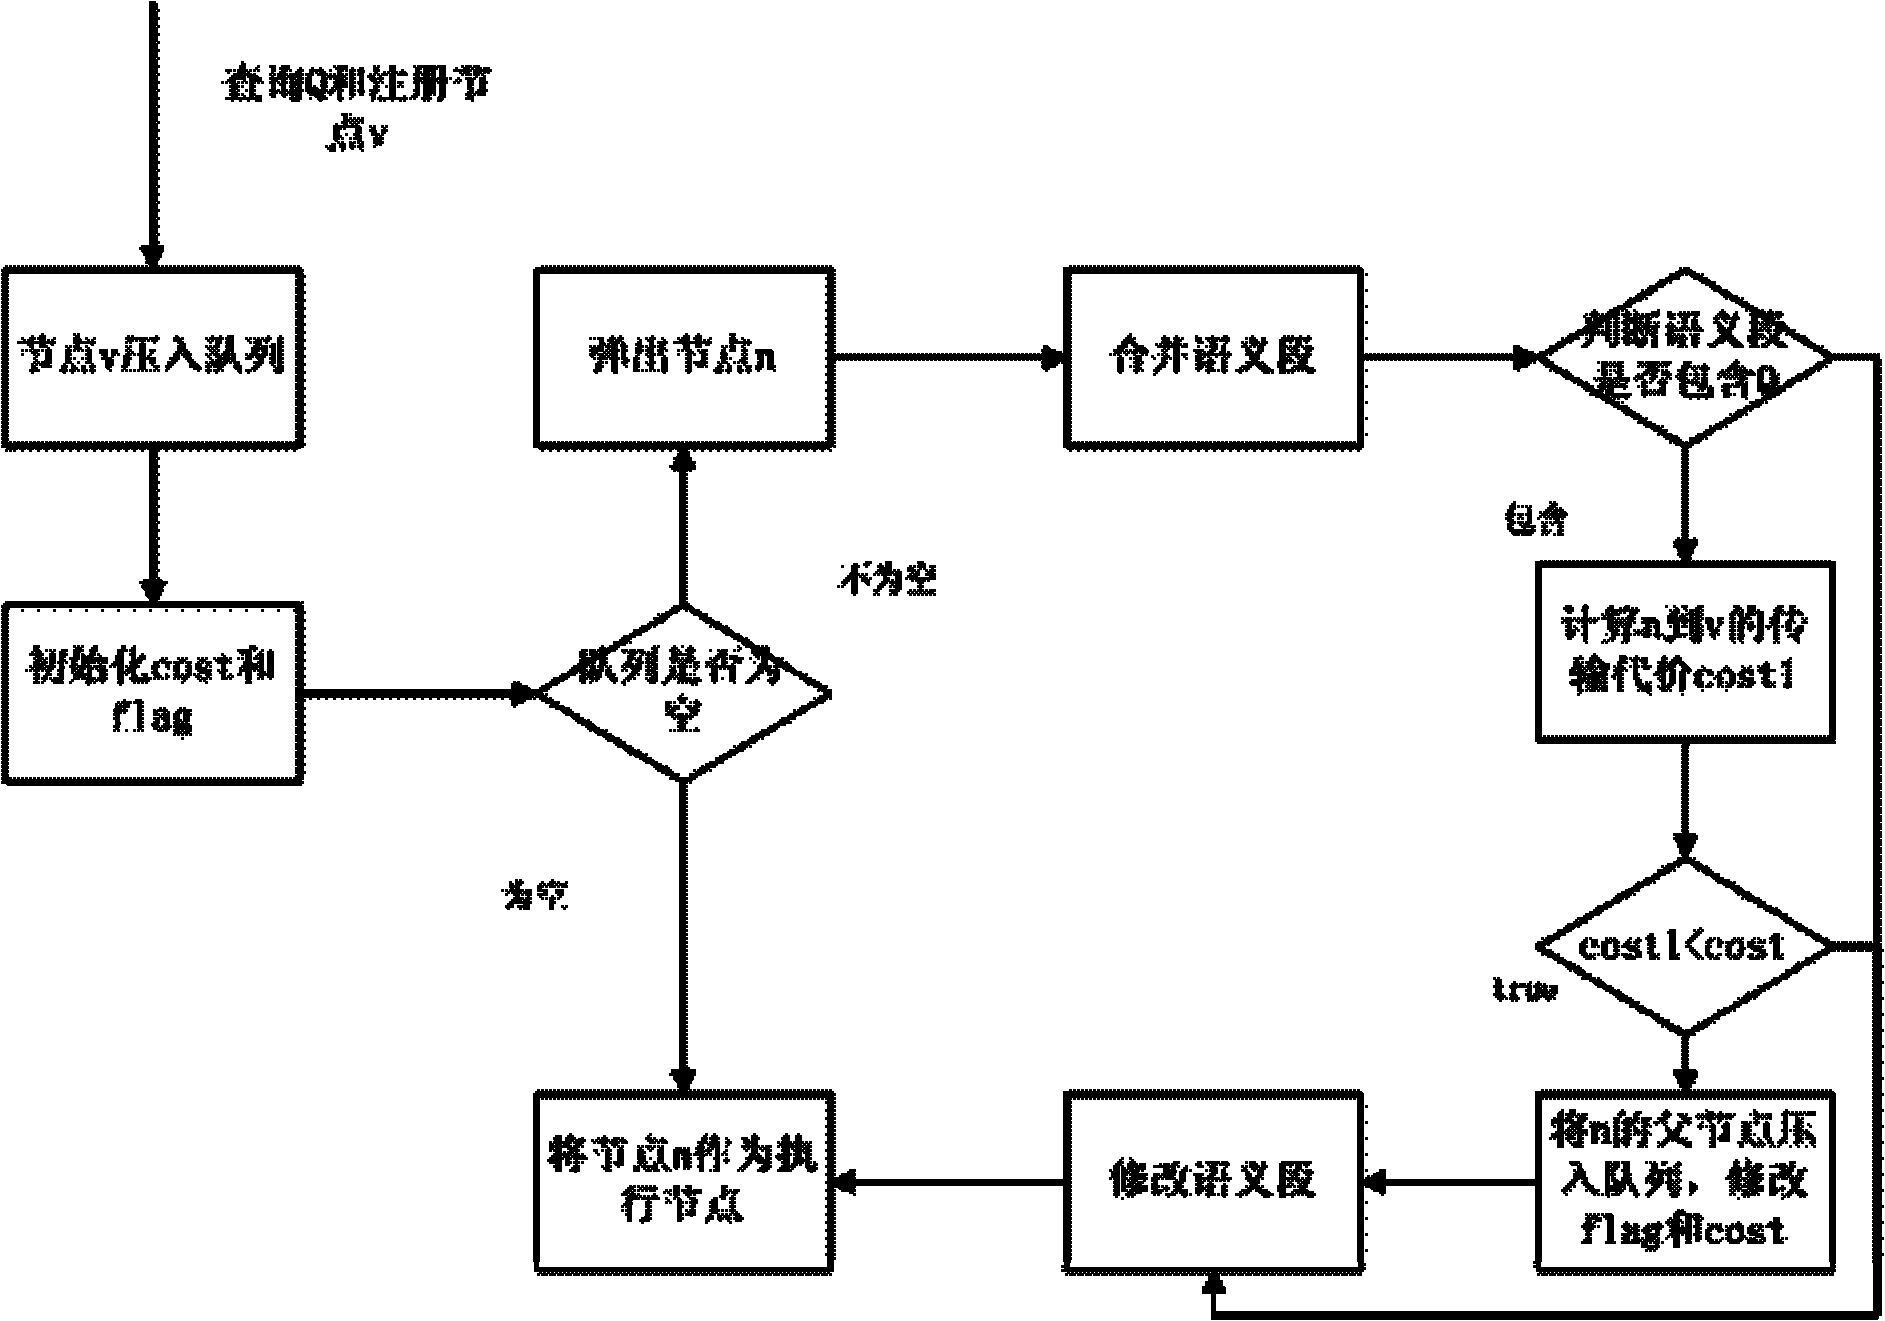 Distributed transmission method for query data stream